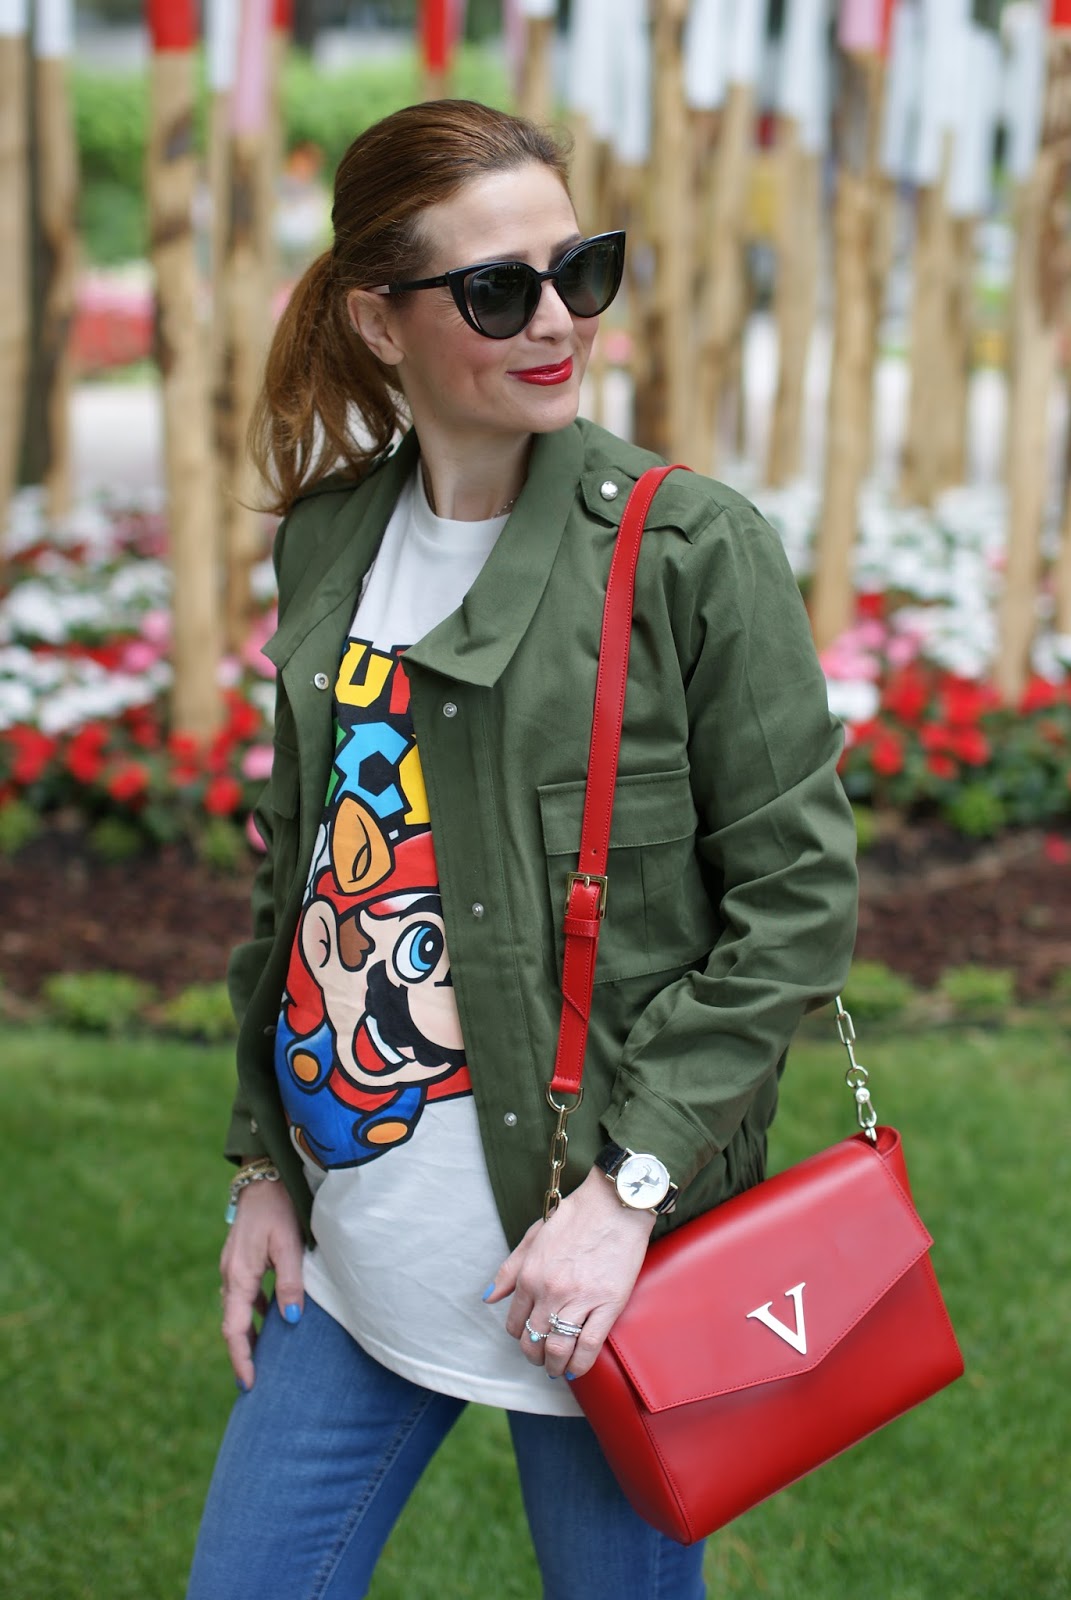 Moschino Super Moschino t-shirt with Super Mario bros, Lookbook Store army green jacket on Fashion and Cookies fashion blog, fashion blogger style